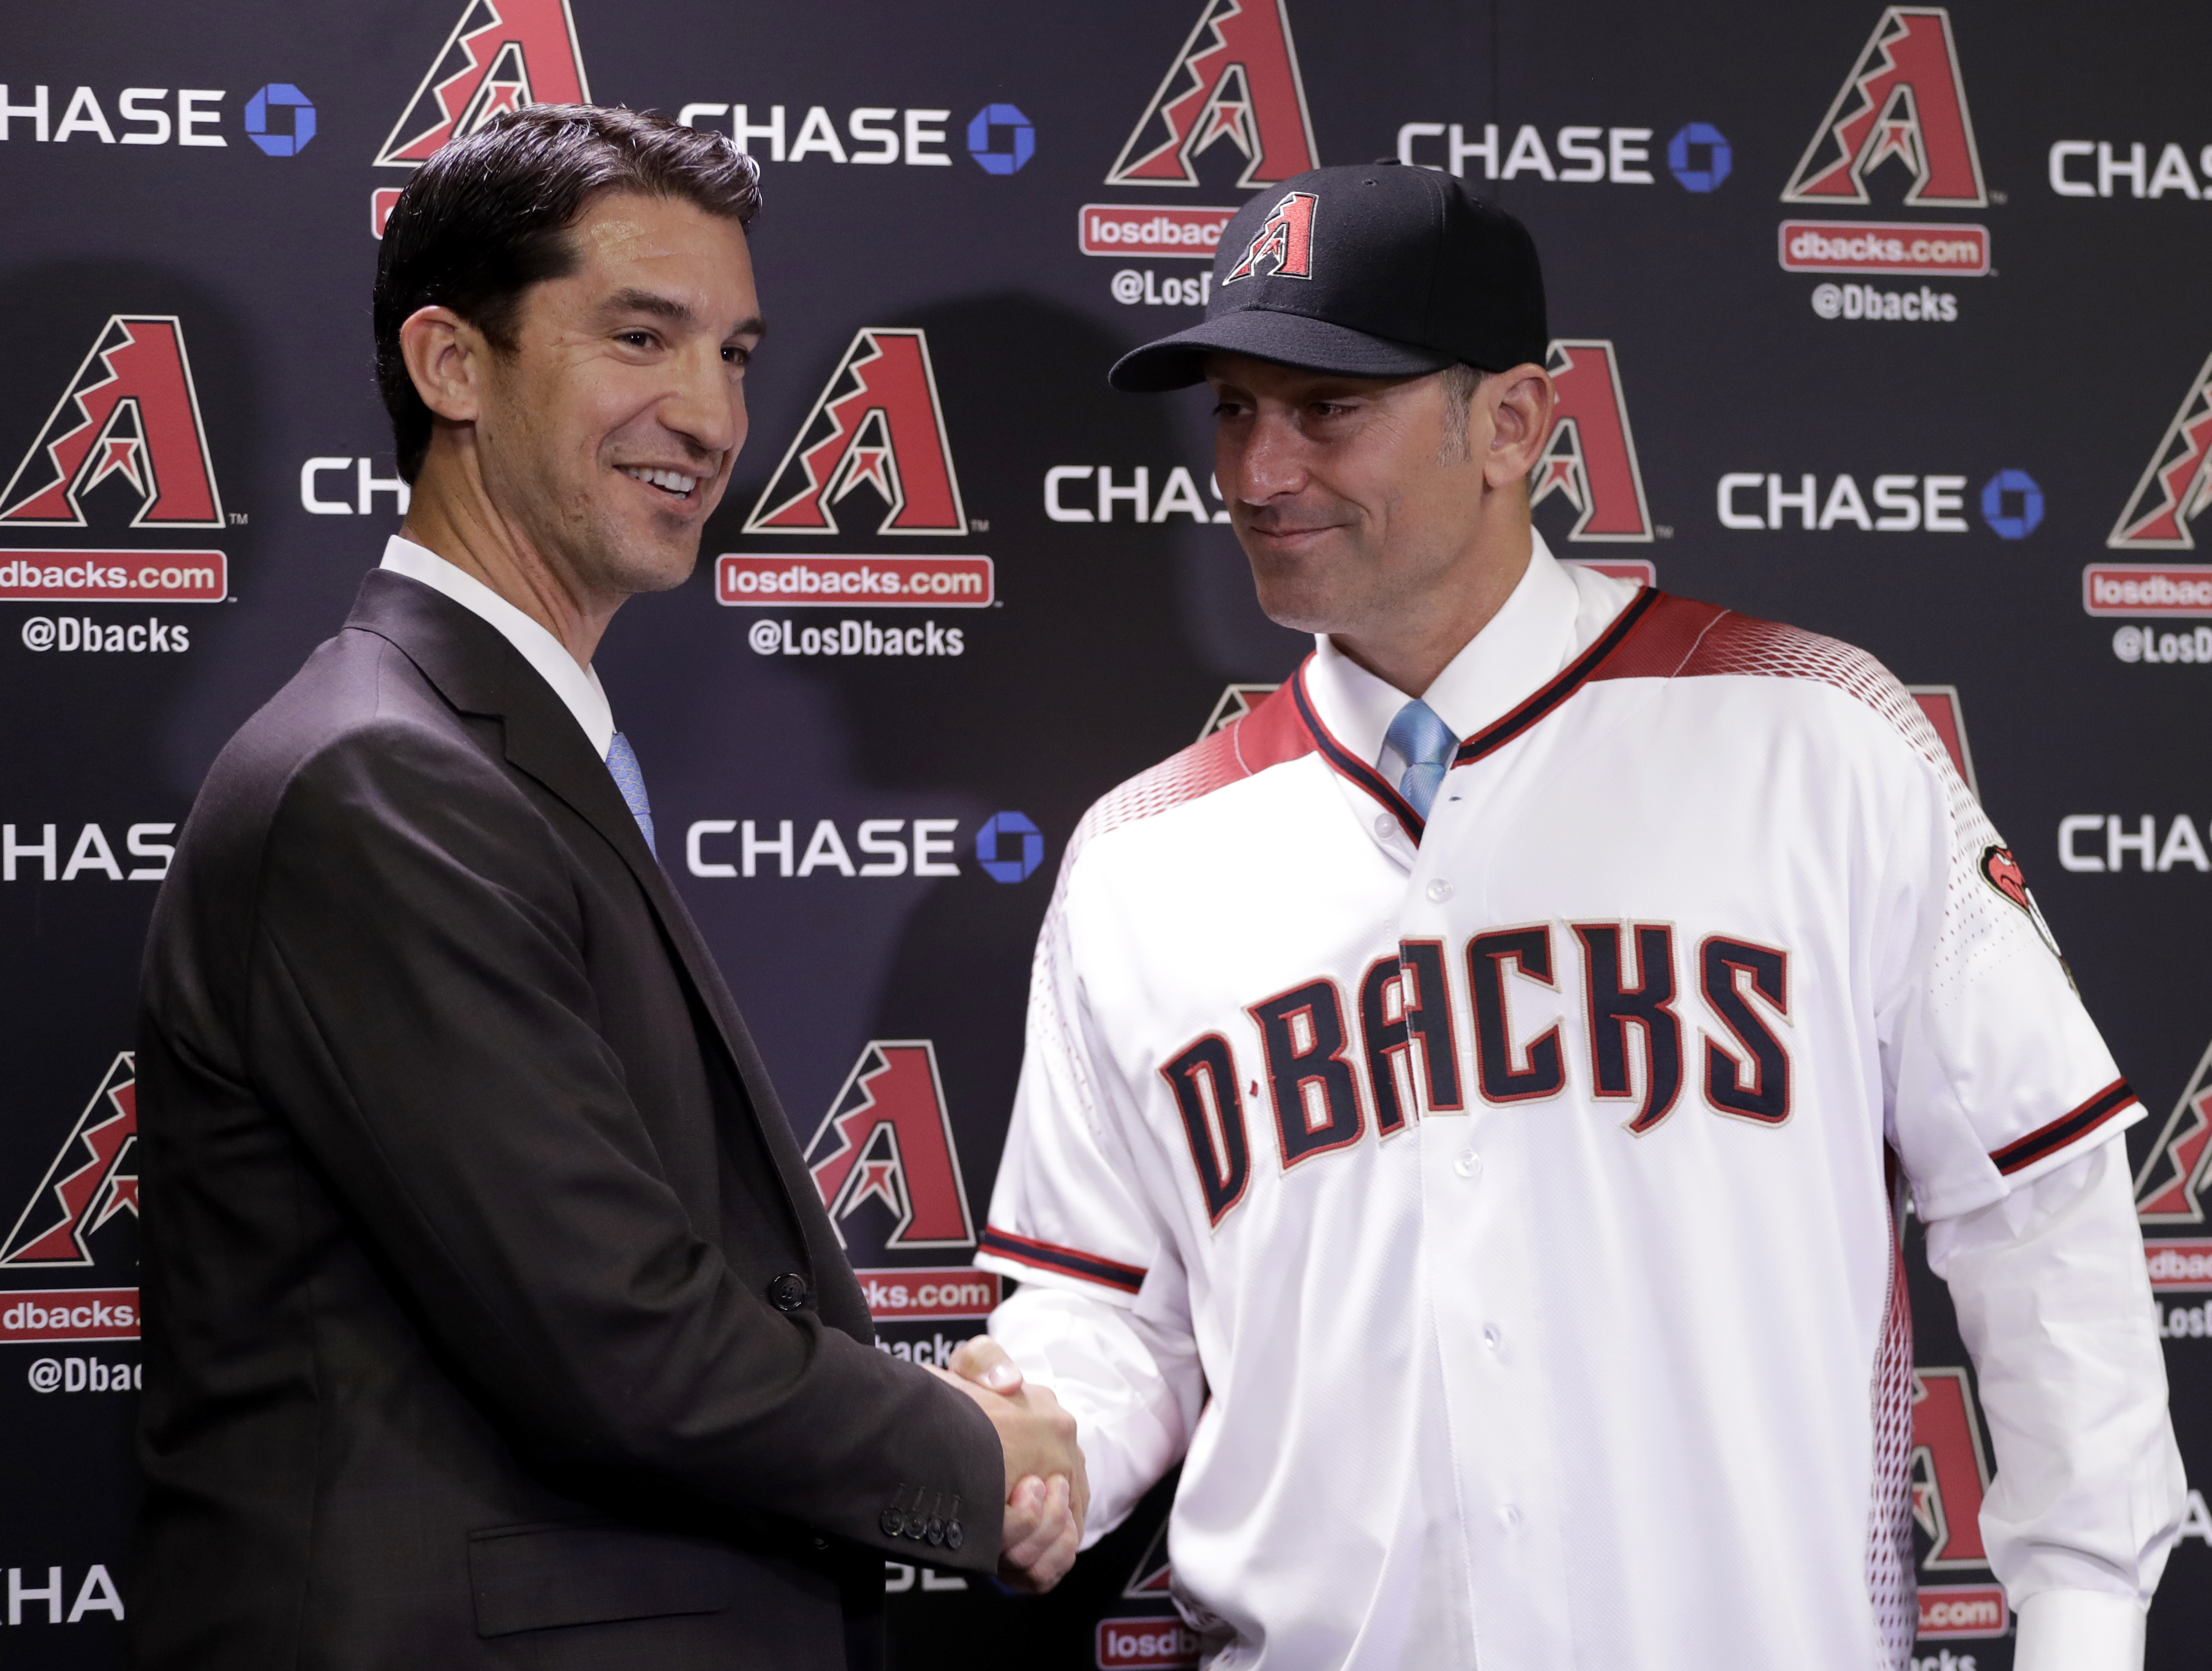 New manager says Dbacks have 'nucleus of great players' Sports